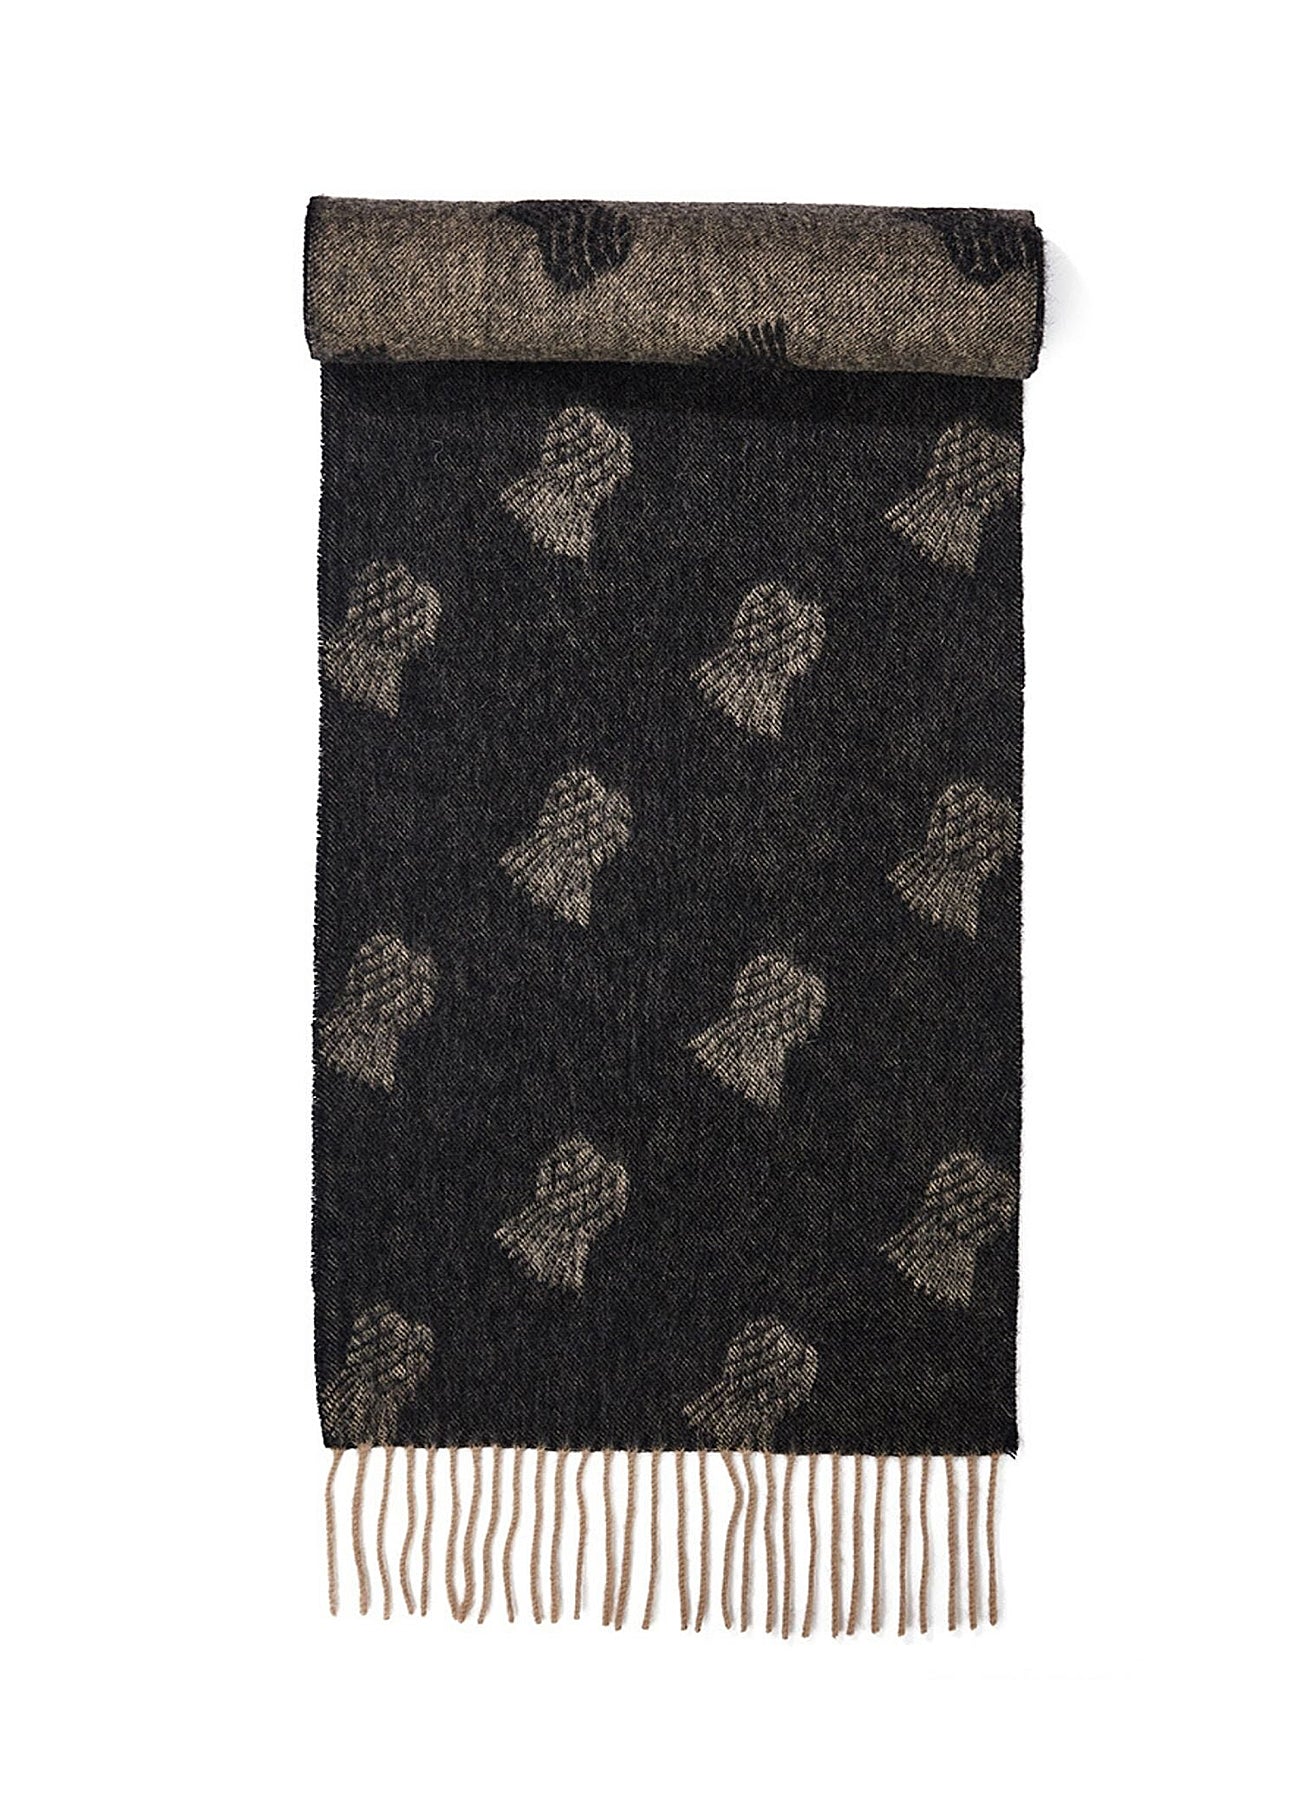 Small Thistle Charcoal Stole 100% Pure Lambswool